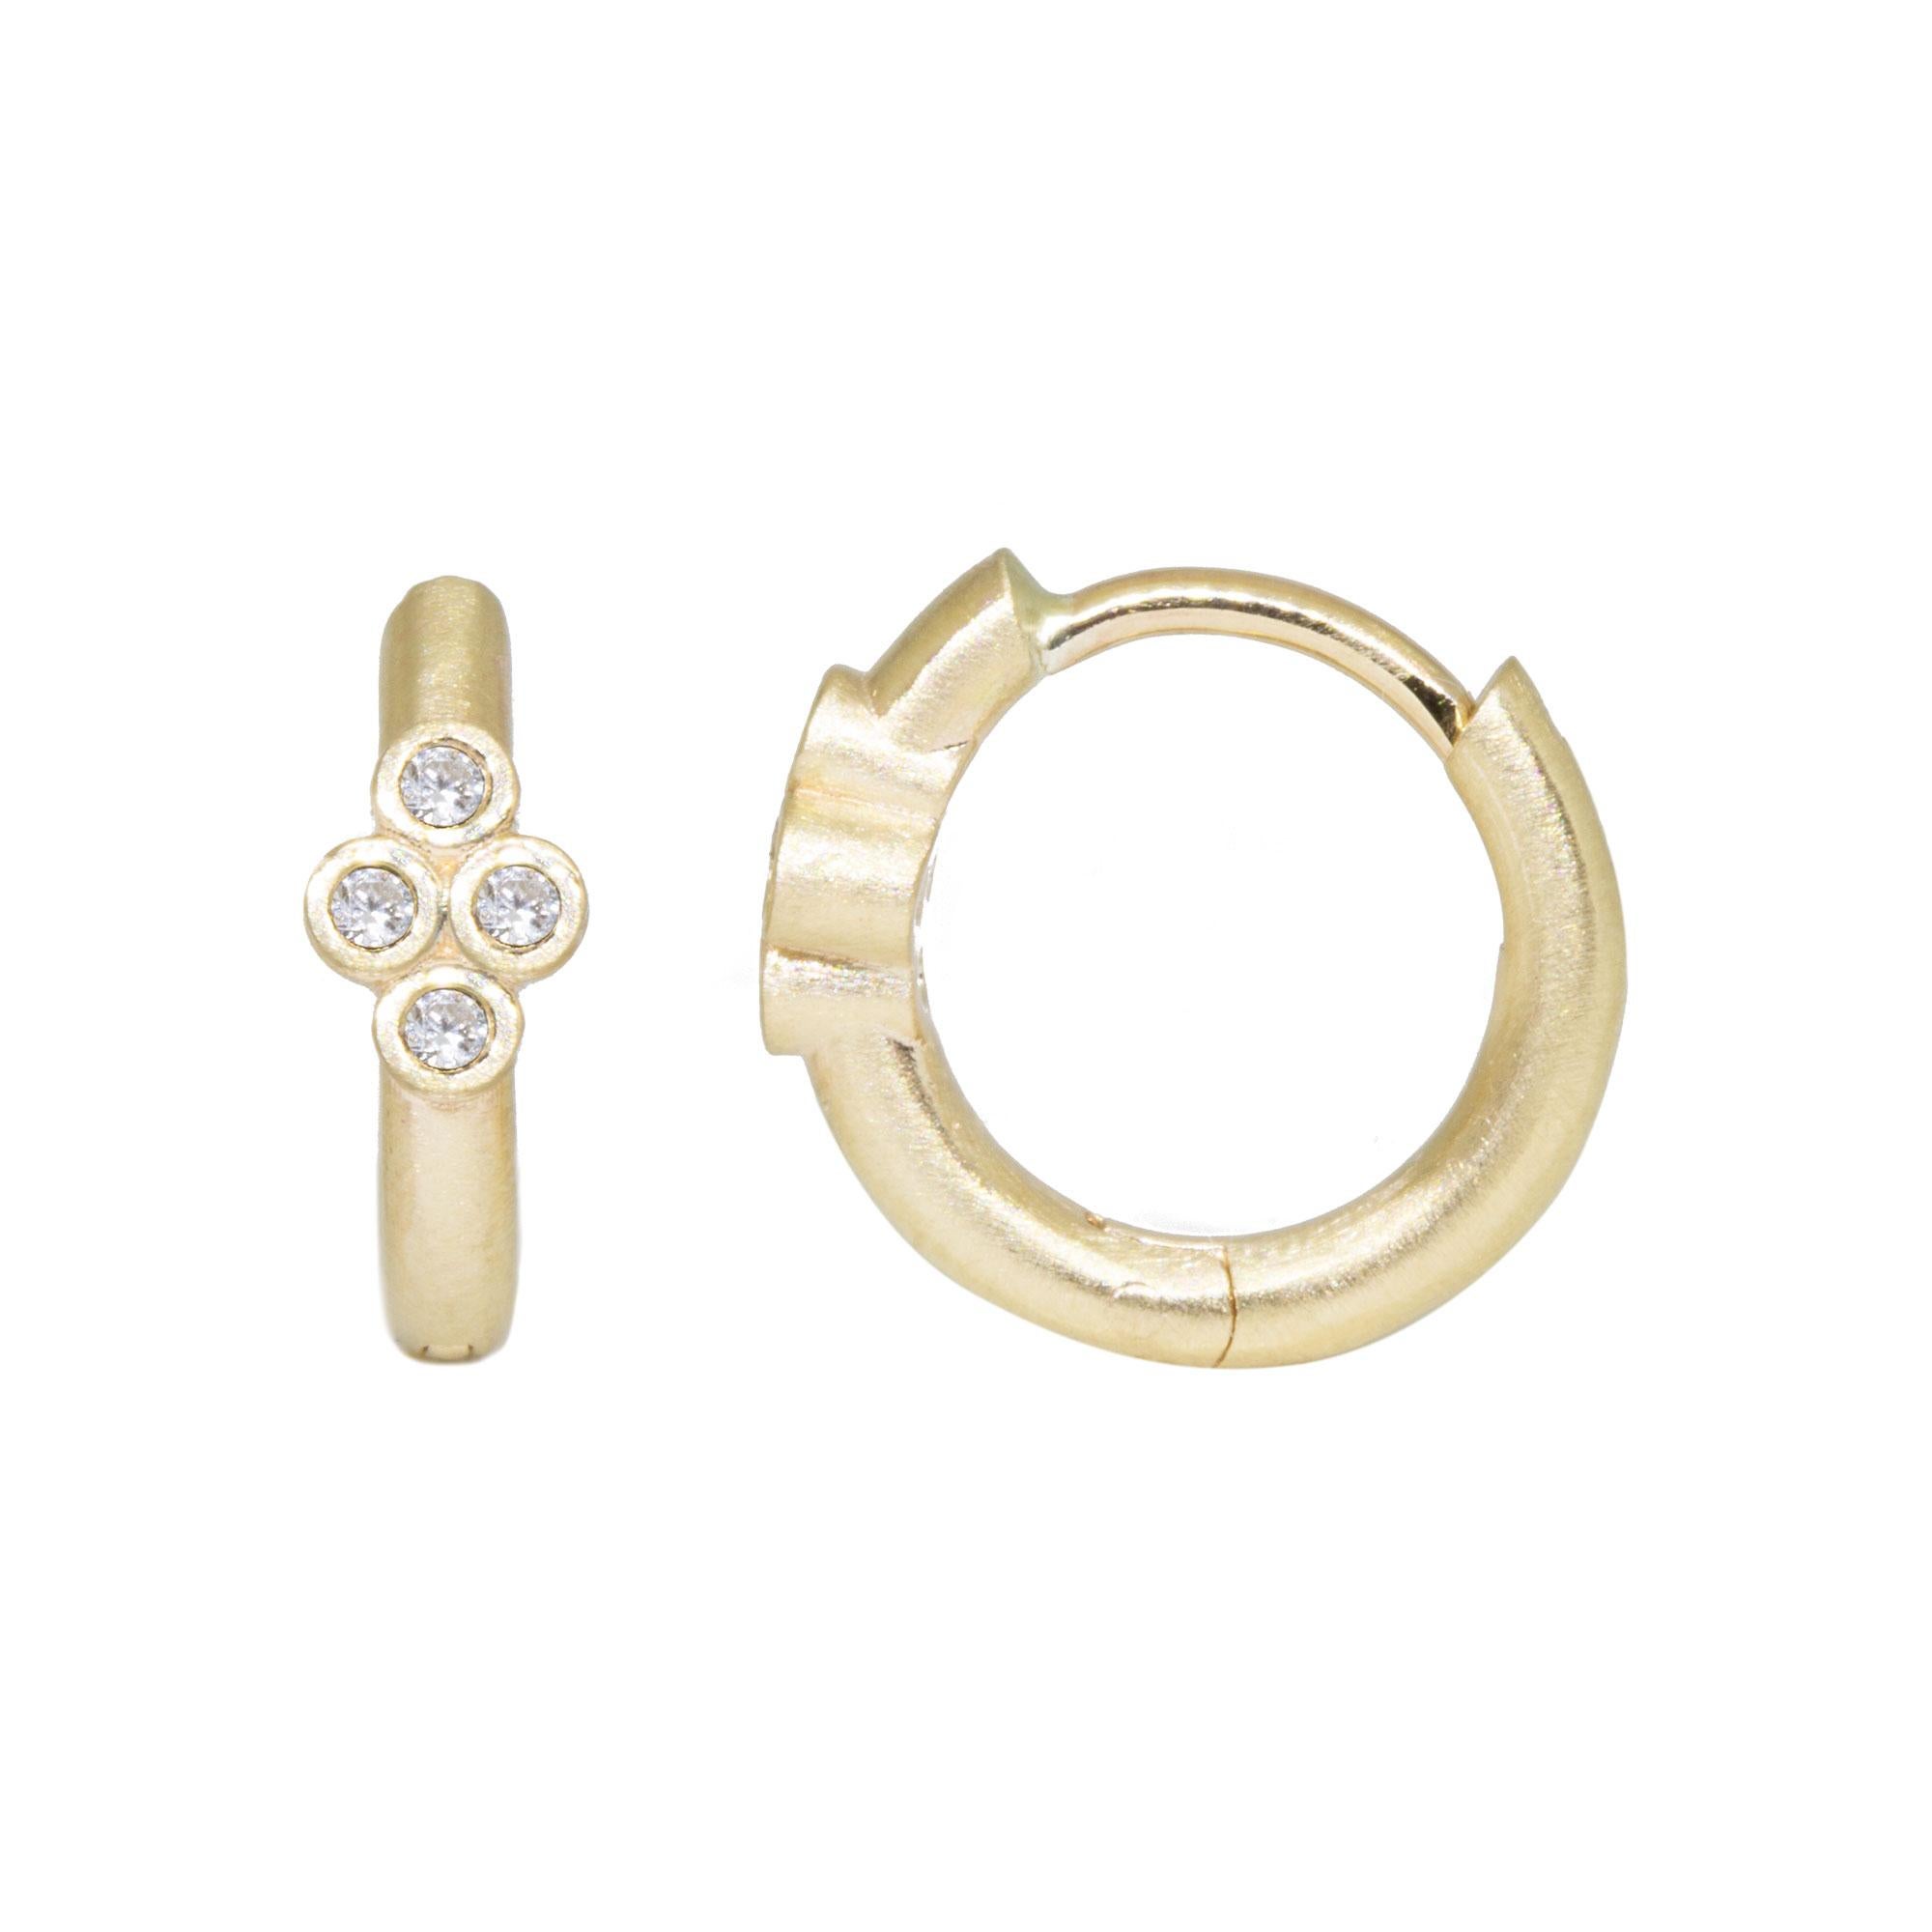 Earwires are made in 18k gold for hypoallergenic.

Details
Metal: 14K Gold, 18K Gold
Diamond carat: 0.075
Hoops Size: 13mm
Diamond size: 1.2mm